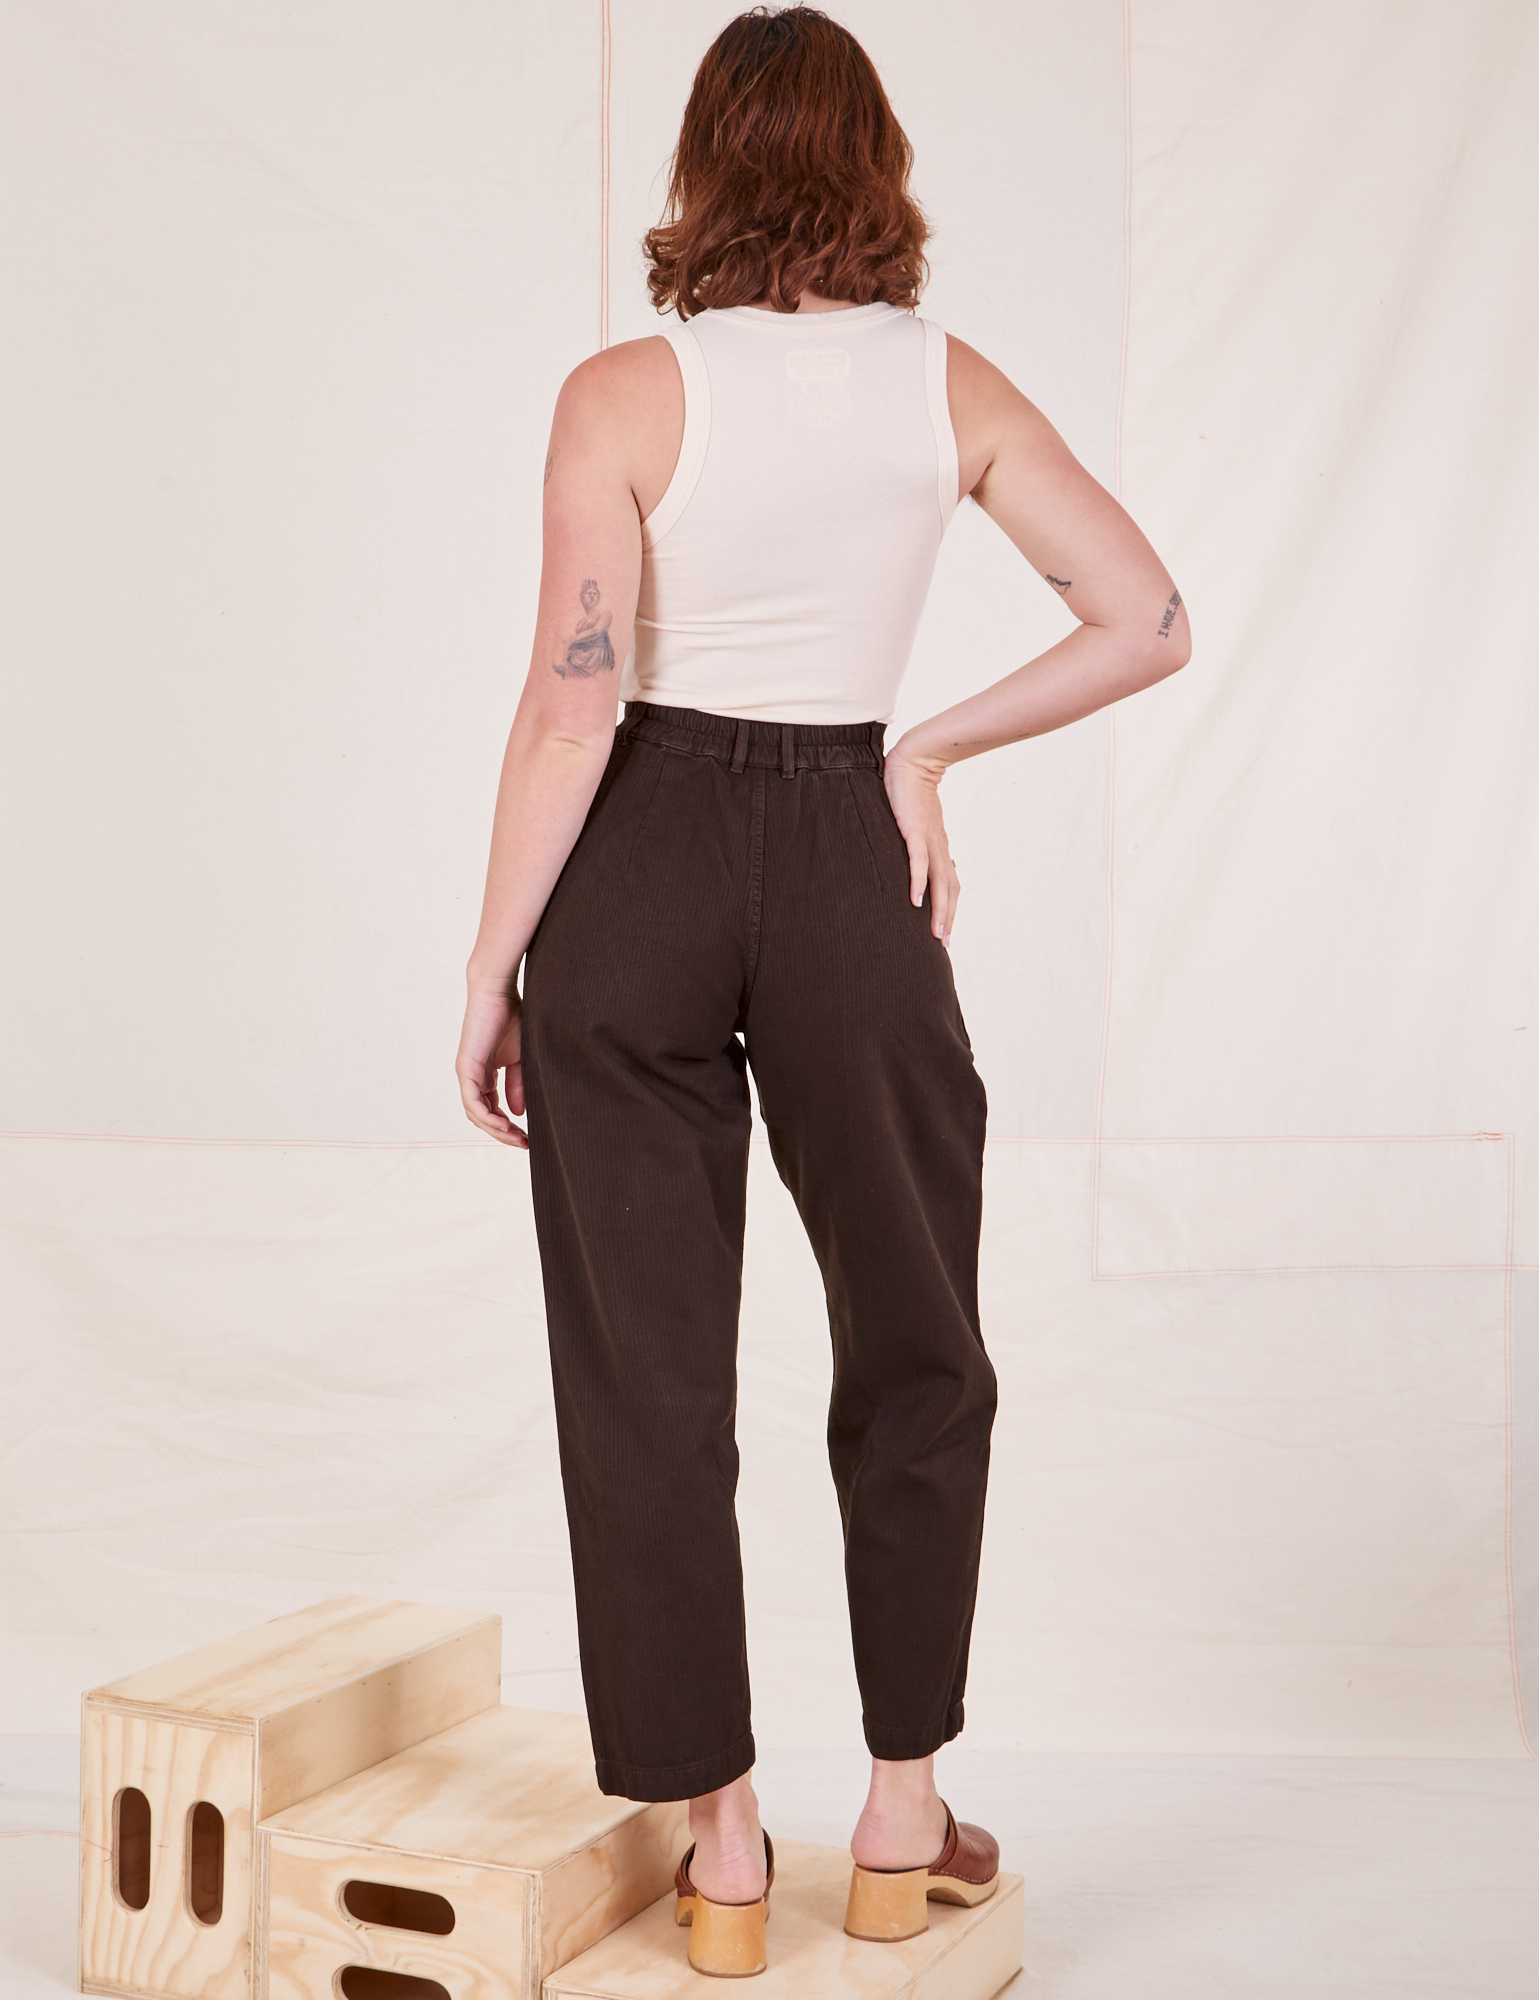 Heritage Trousers in Espresso Brown back view worn by Alex